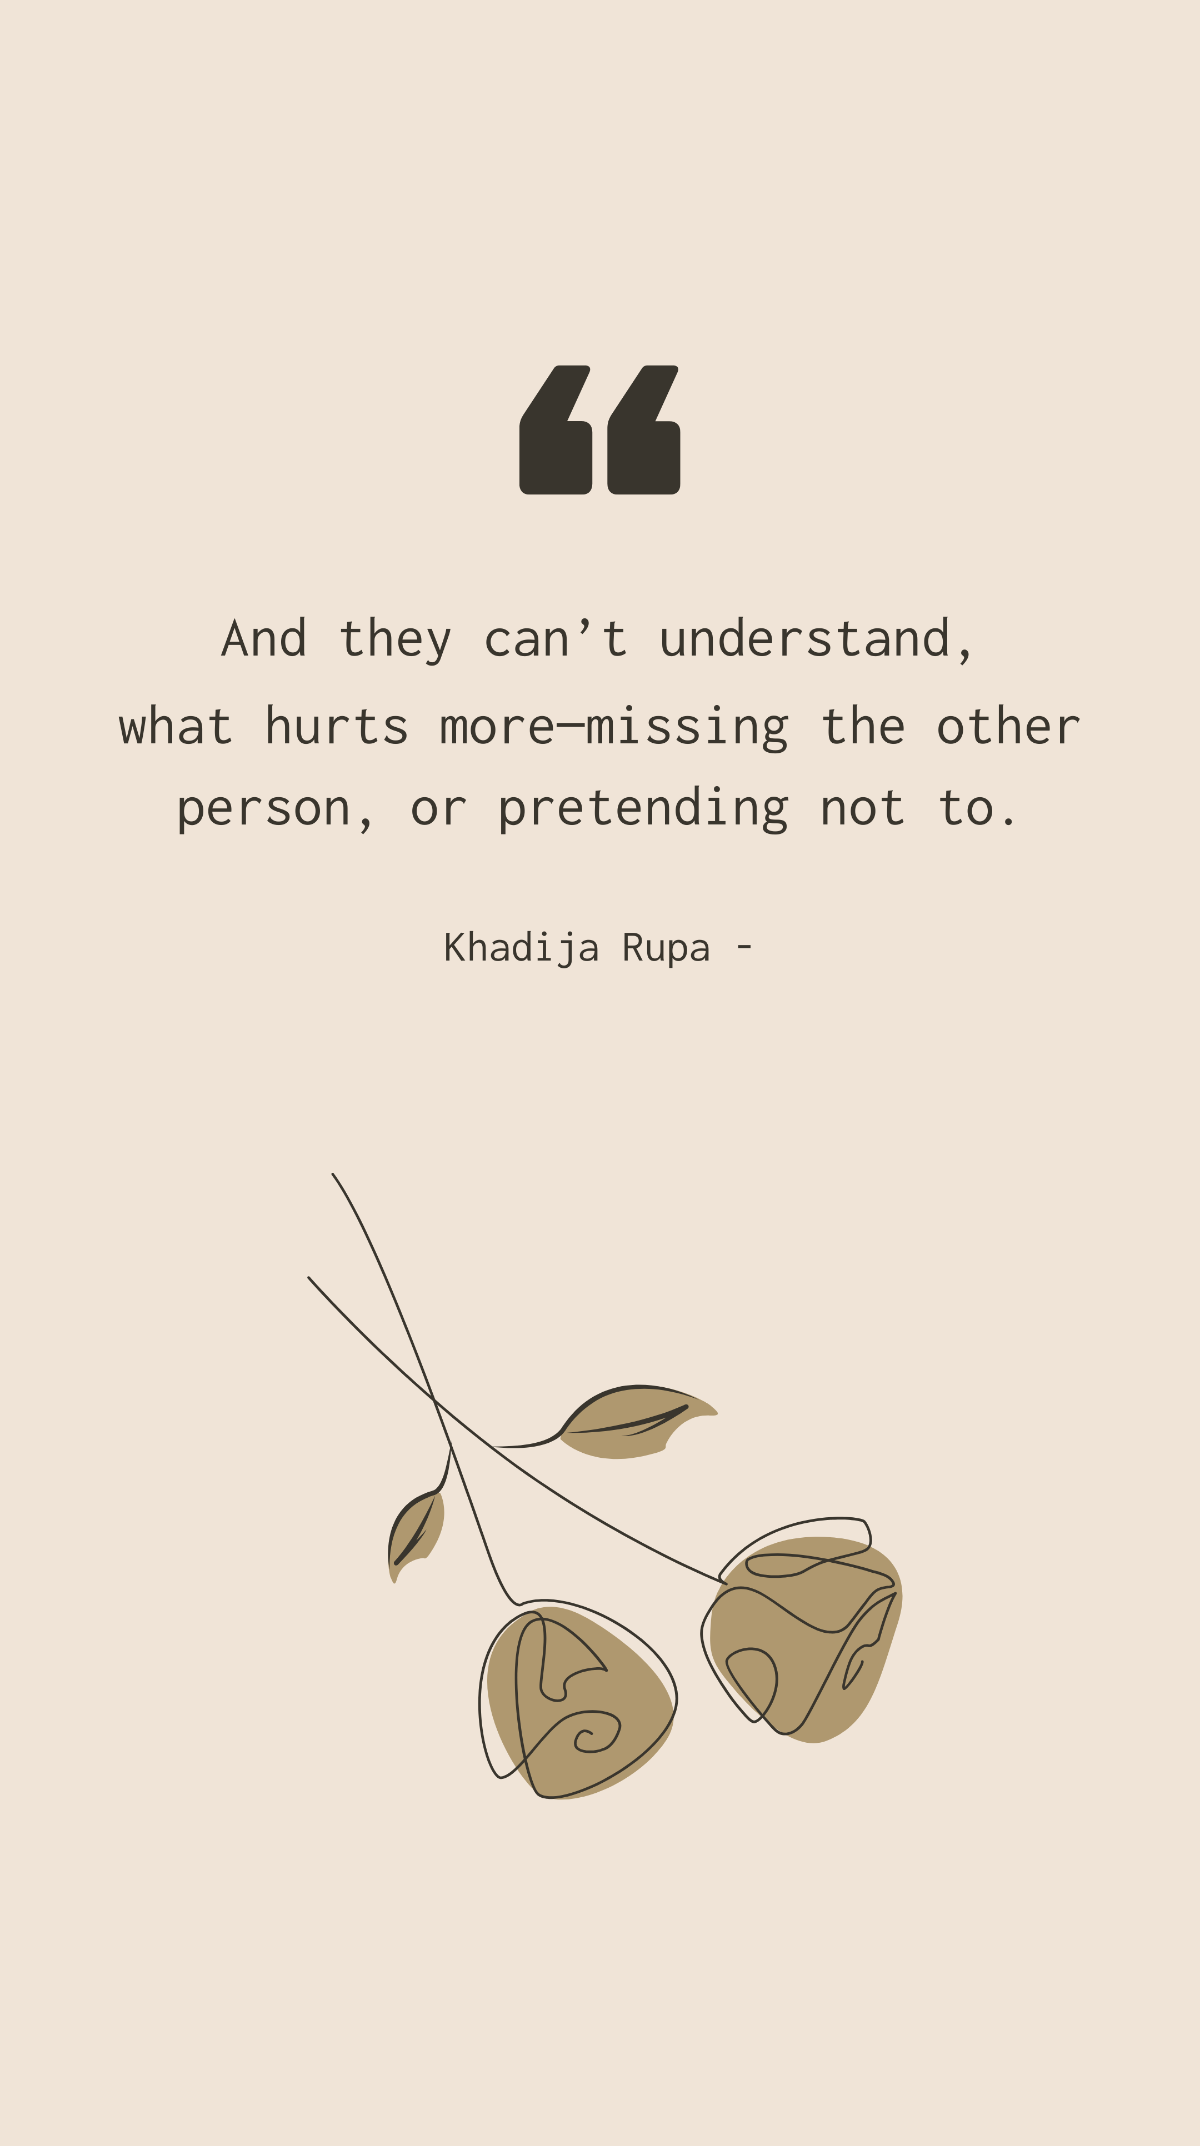 Khadija Rupa - And they can’t understand, what hurts more—missing the other person, or pretending not to. Template